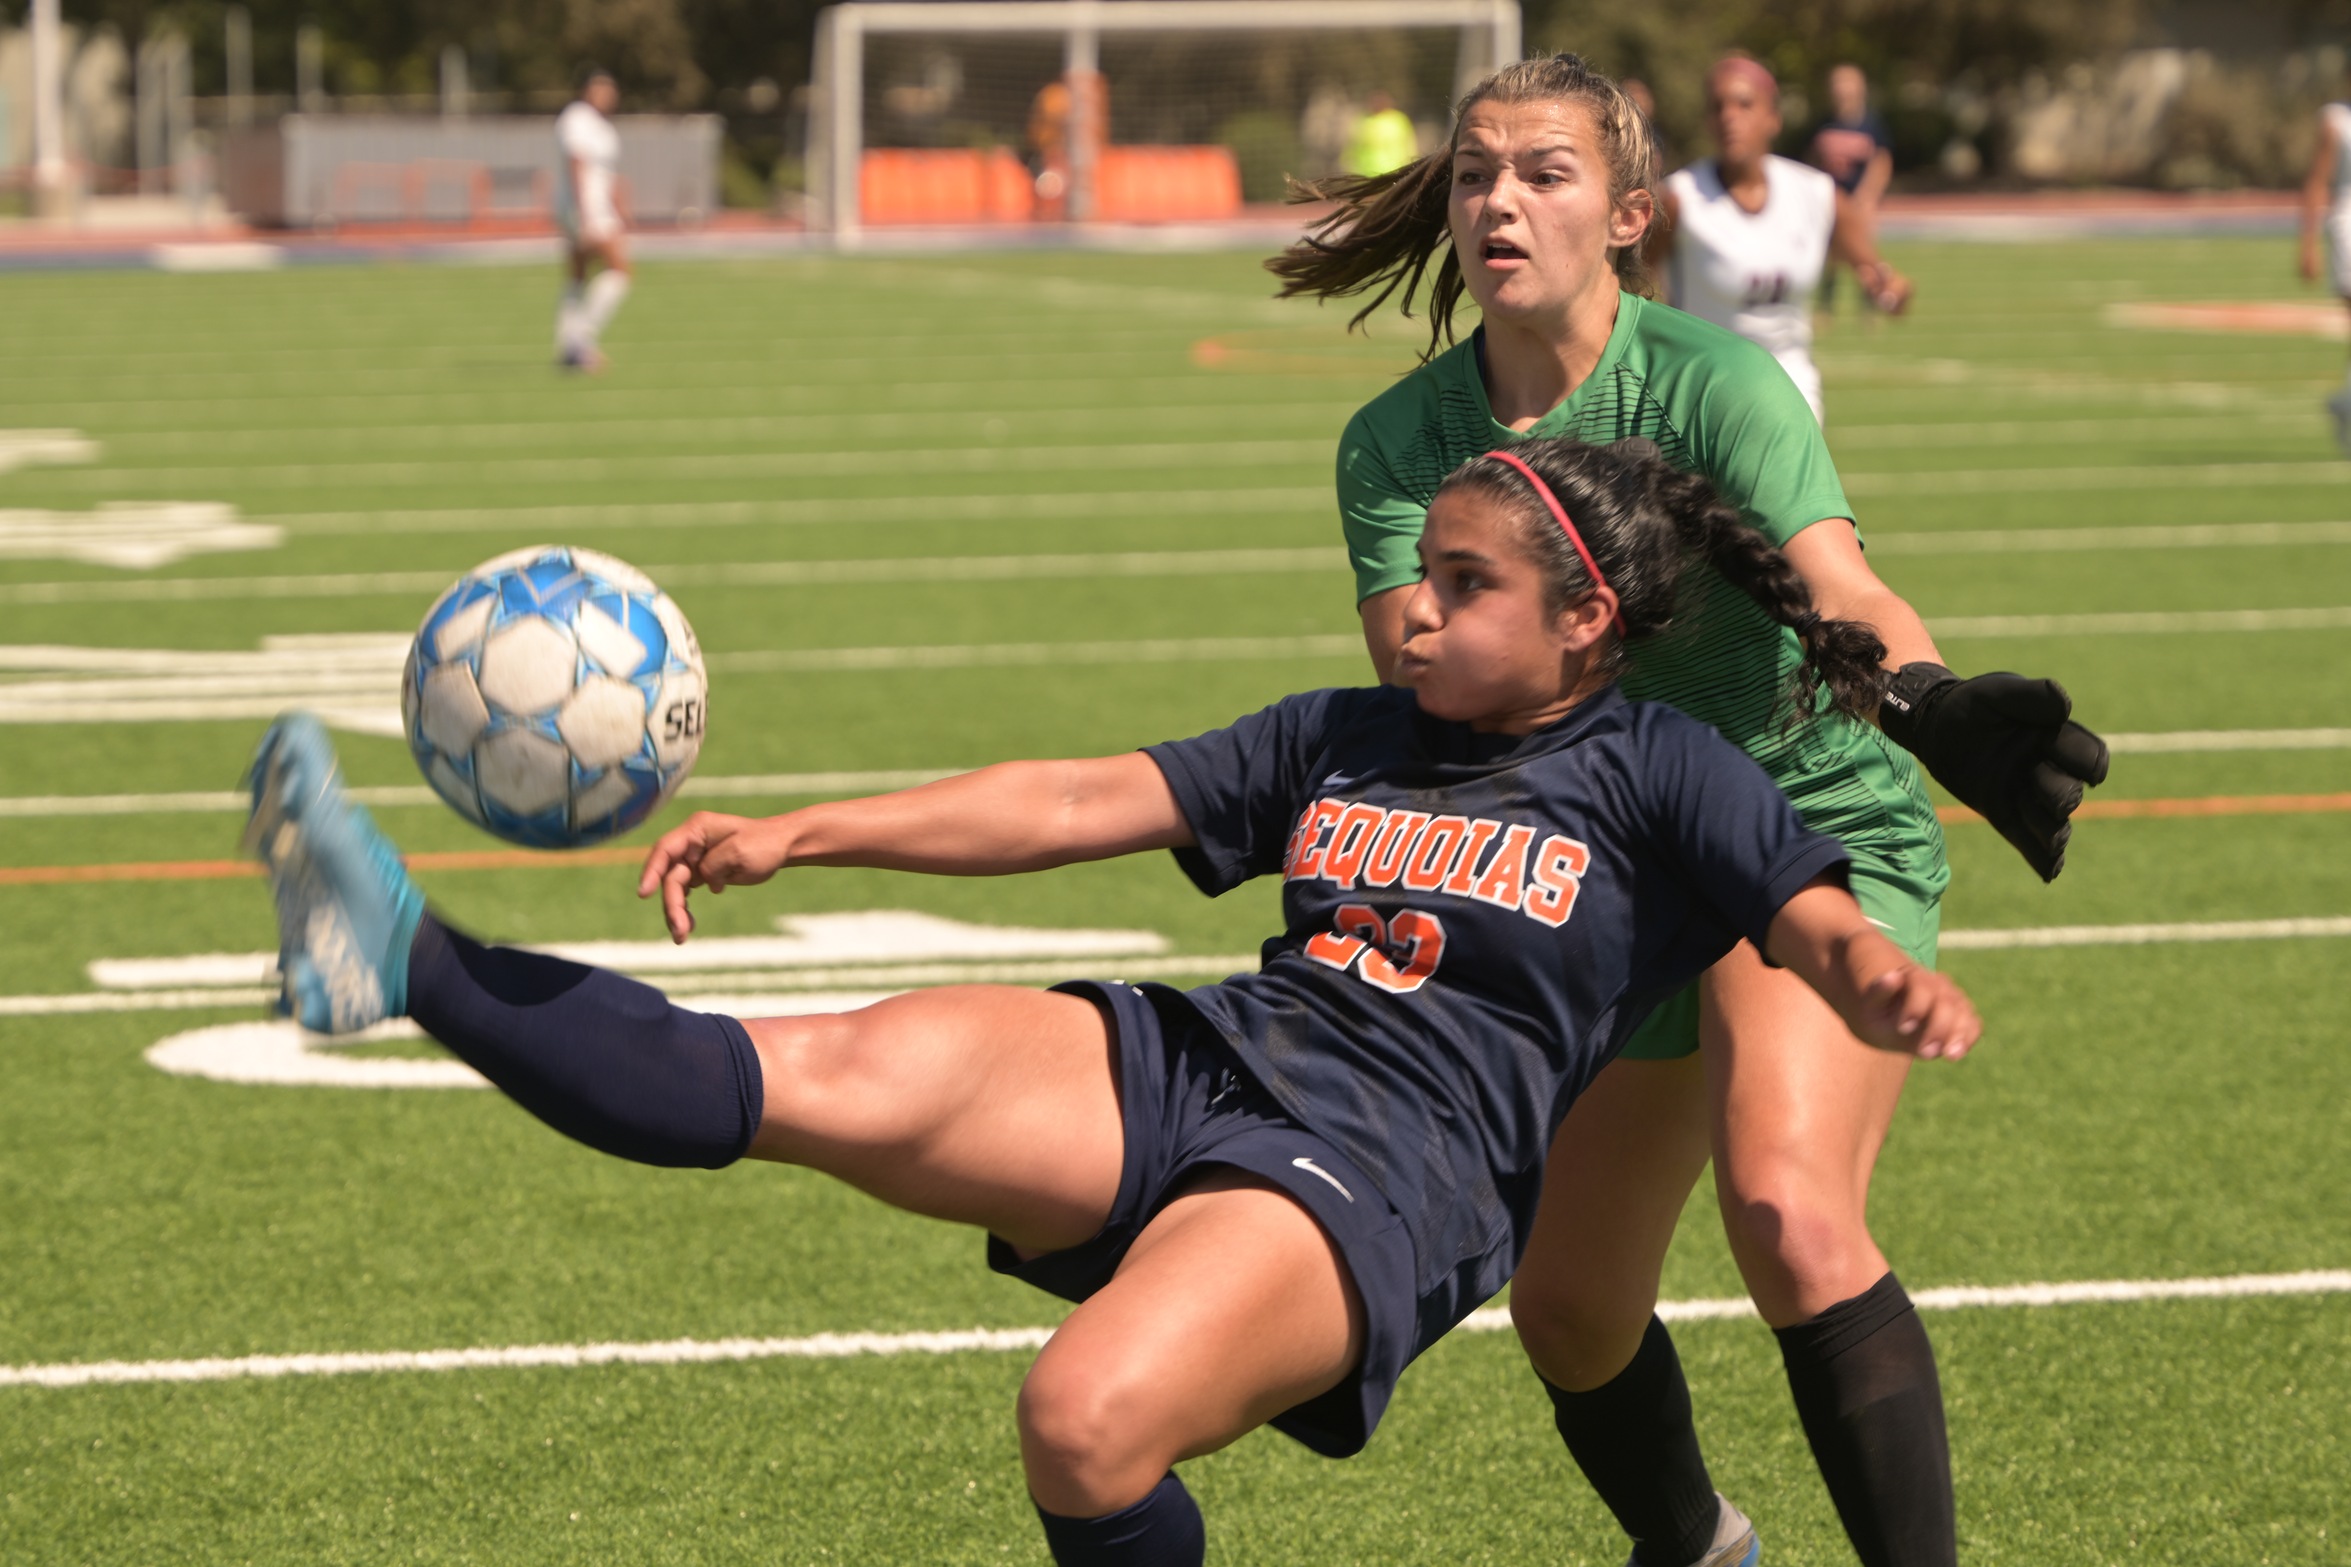 Giants hope increased firepower leads to women's soccer playoff berth